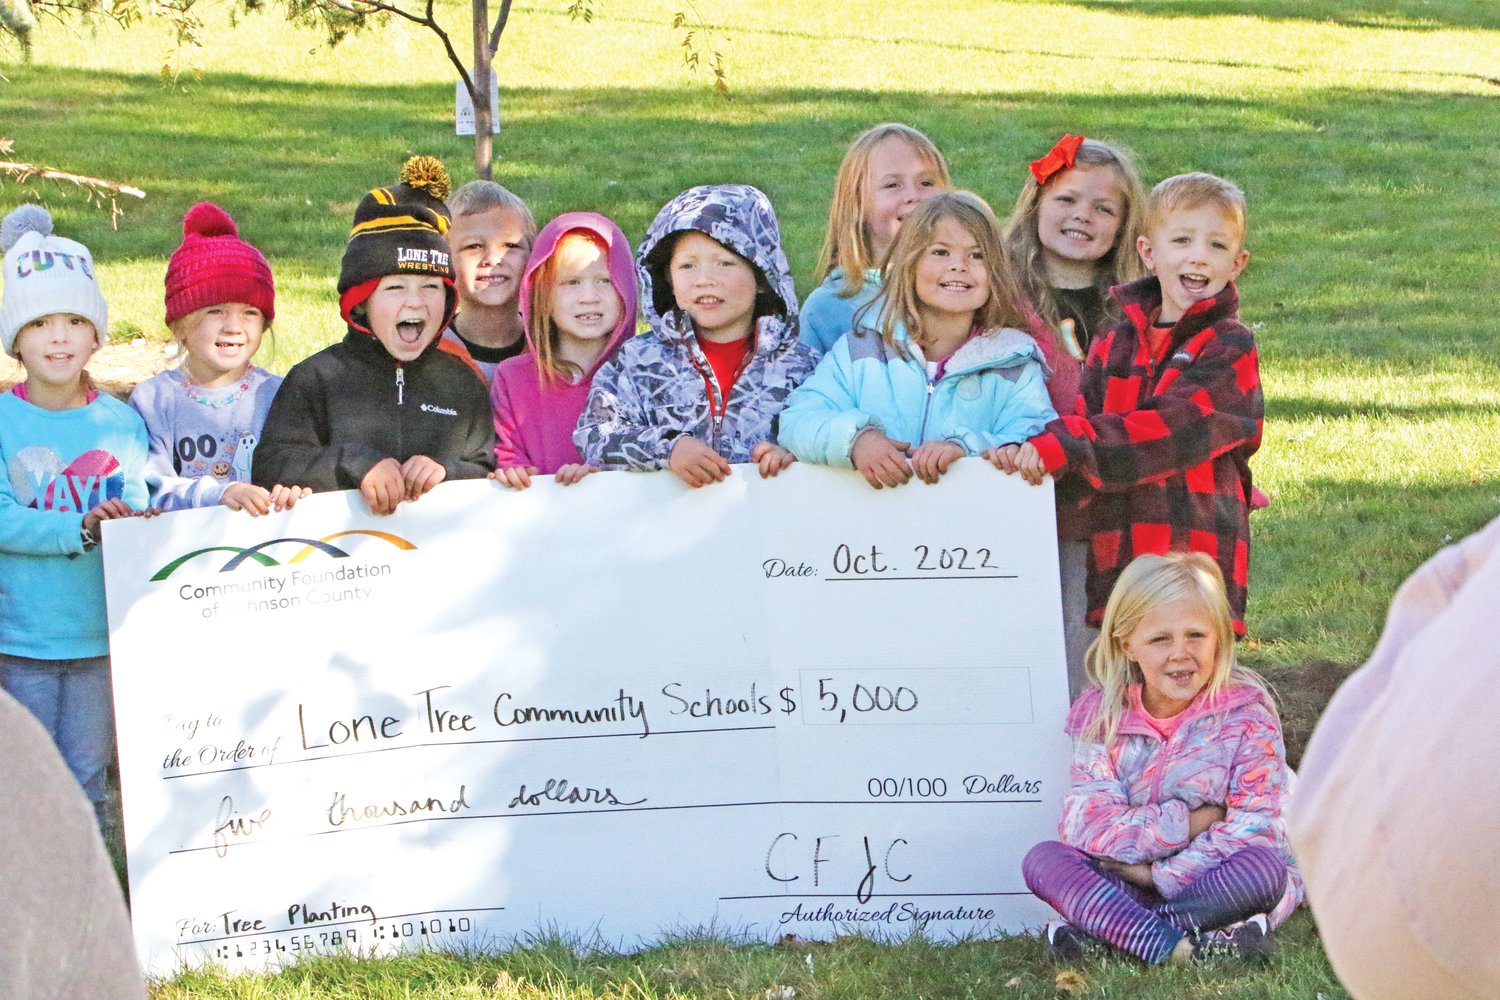 Lone Tree Elementary Students smile with half of the grant money provided by the Community Foundation of Johnson County.